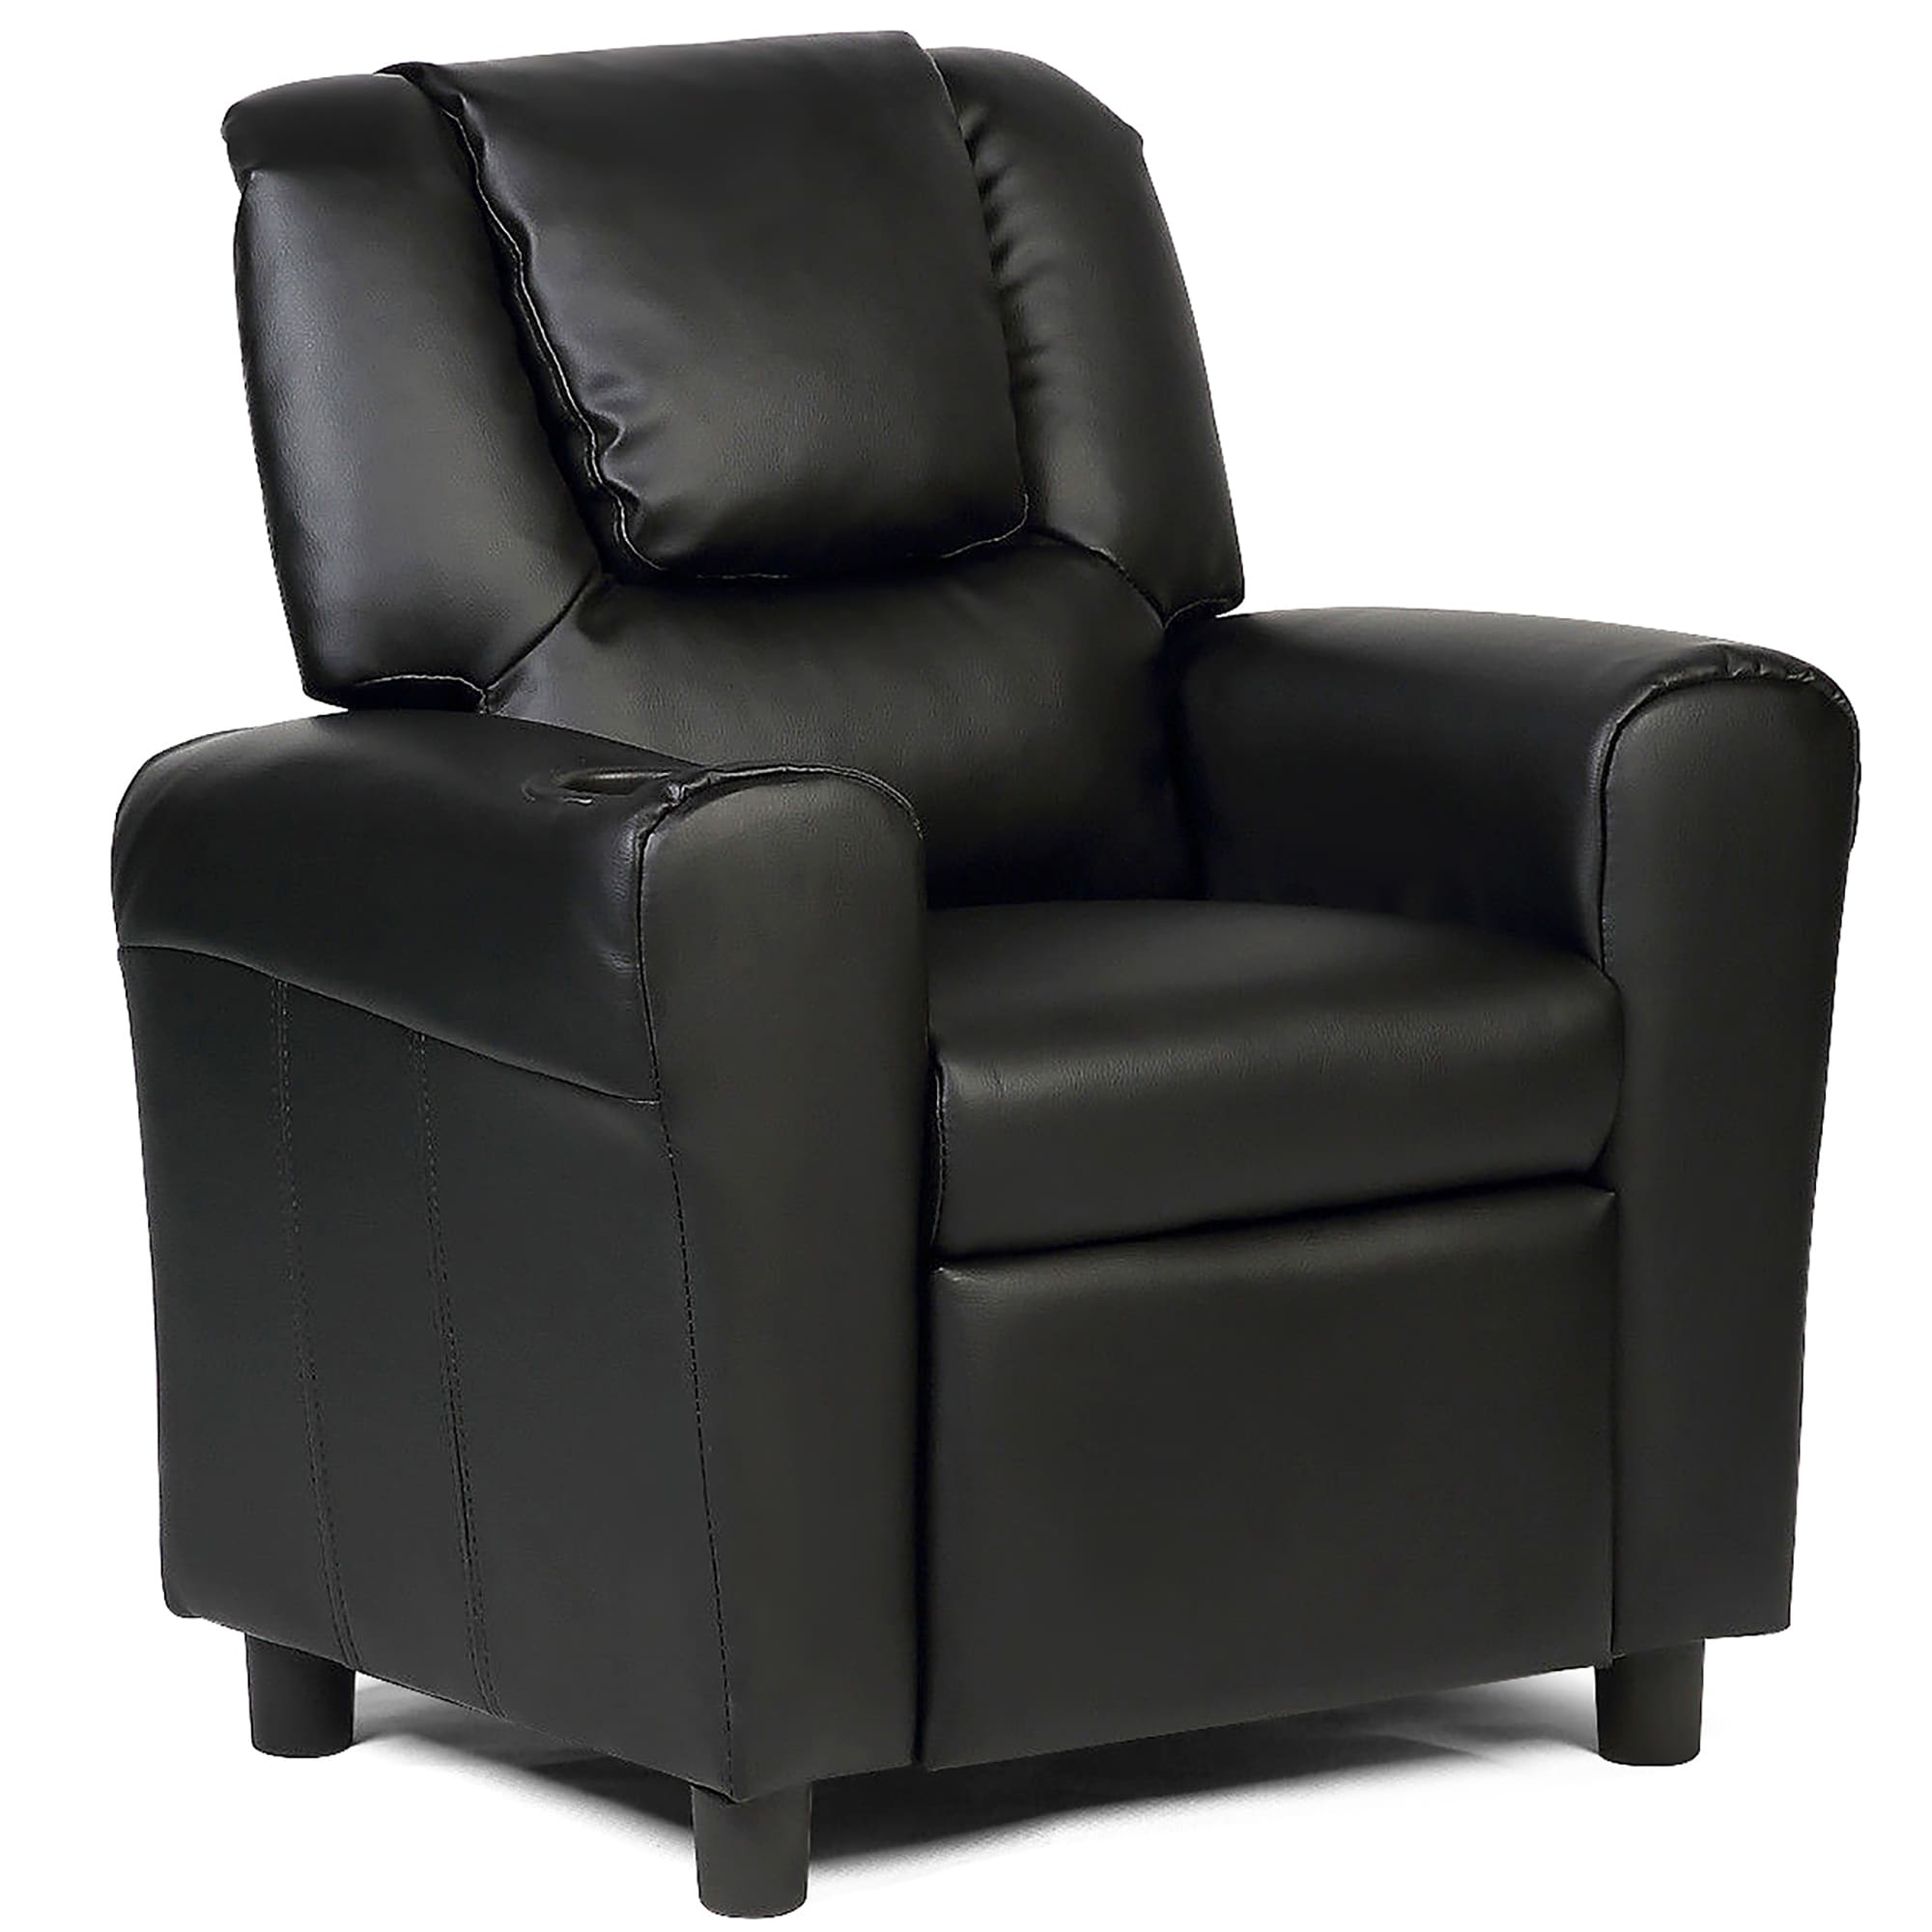 Kids Recliner Chair with Cup Holder Children Armrest Sofa